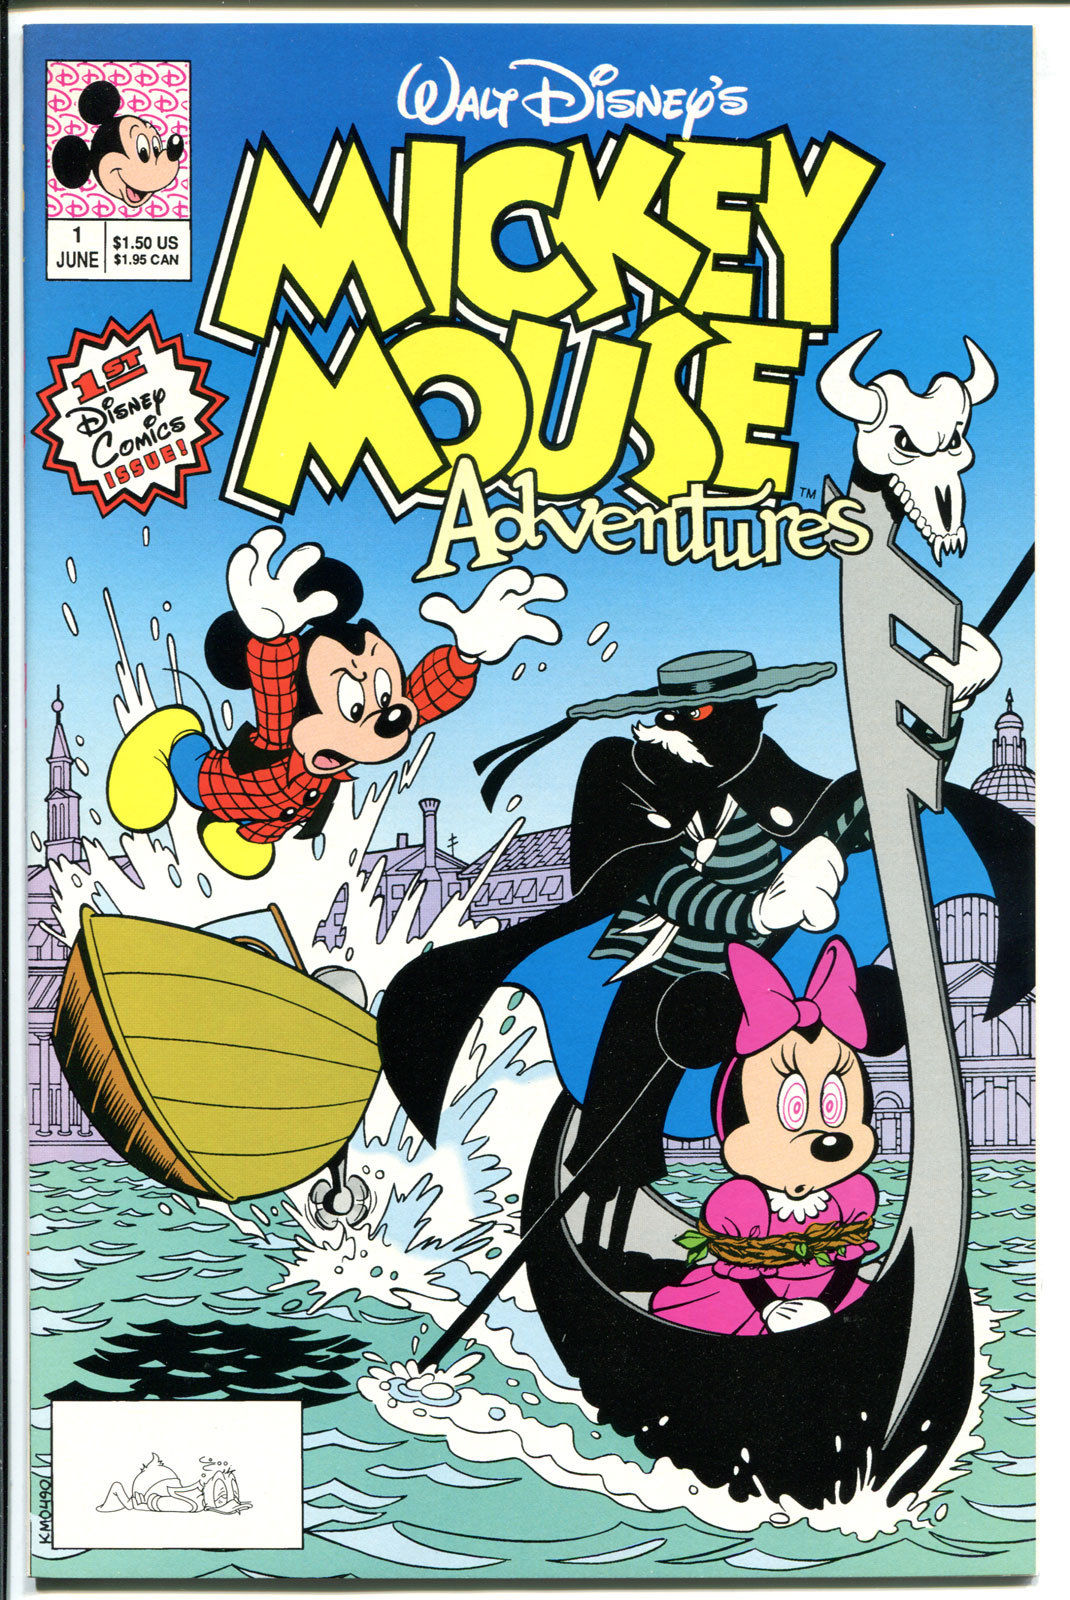 MICKEY MOUSE ADVENTURES #1,  NM+, Walt, 1st Disney, 1990, more Disney in store